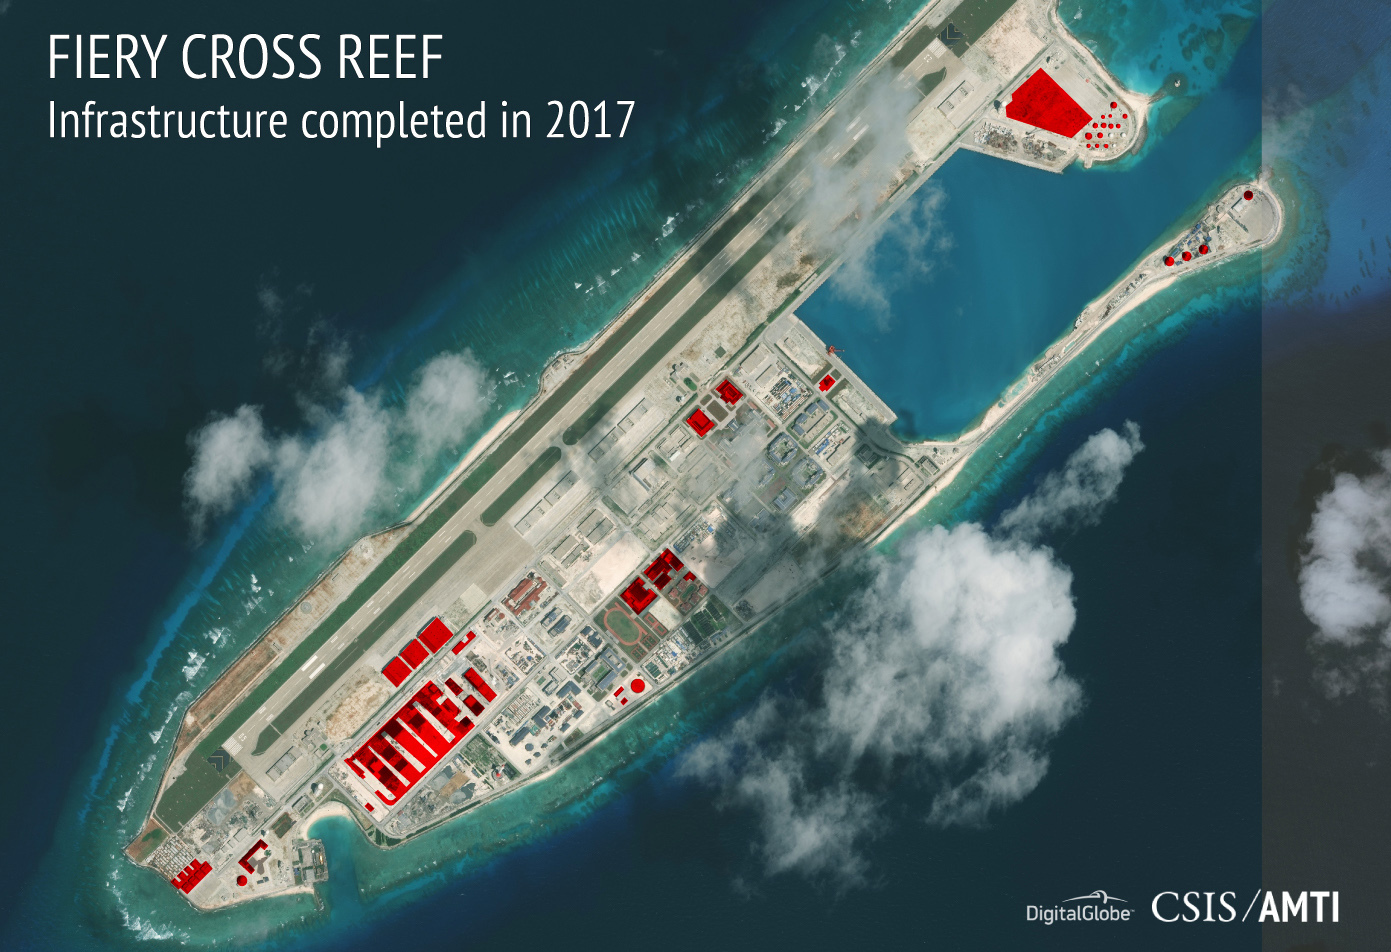 An annotated satellite image of Fiery Cross Reef in the Spratly island chain of the South China Sea shows areas where China has conducted construction work above ground during 2017. | CSIS ASIA MARITIME TRANSPARENCY INITIATIVE / DIGITALGLOBE / VIA AP